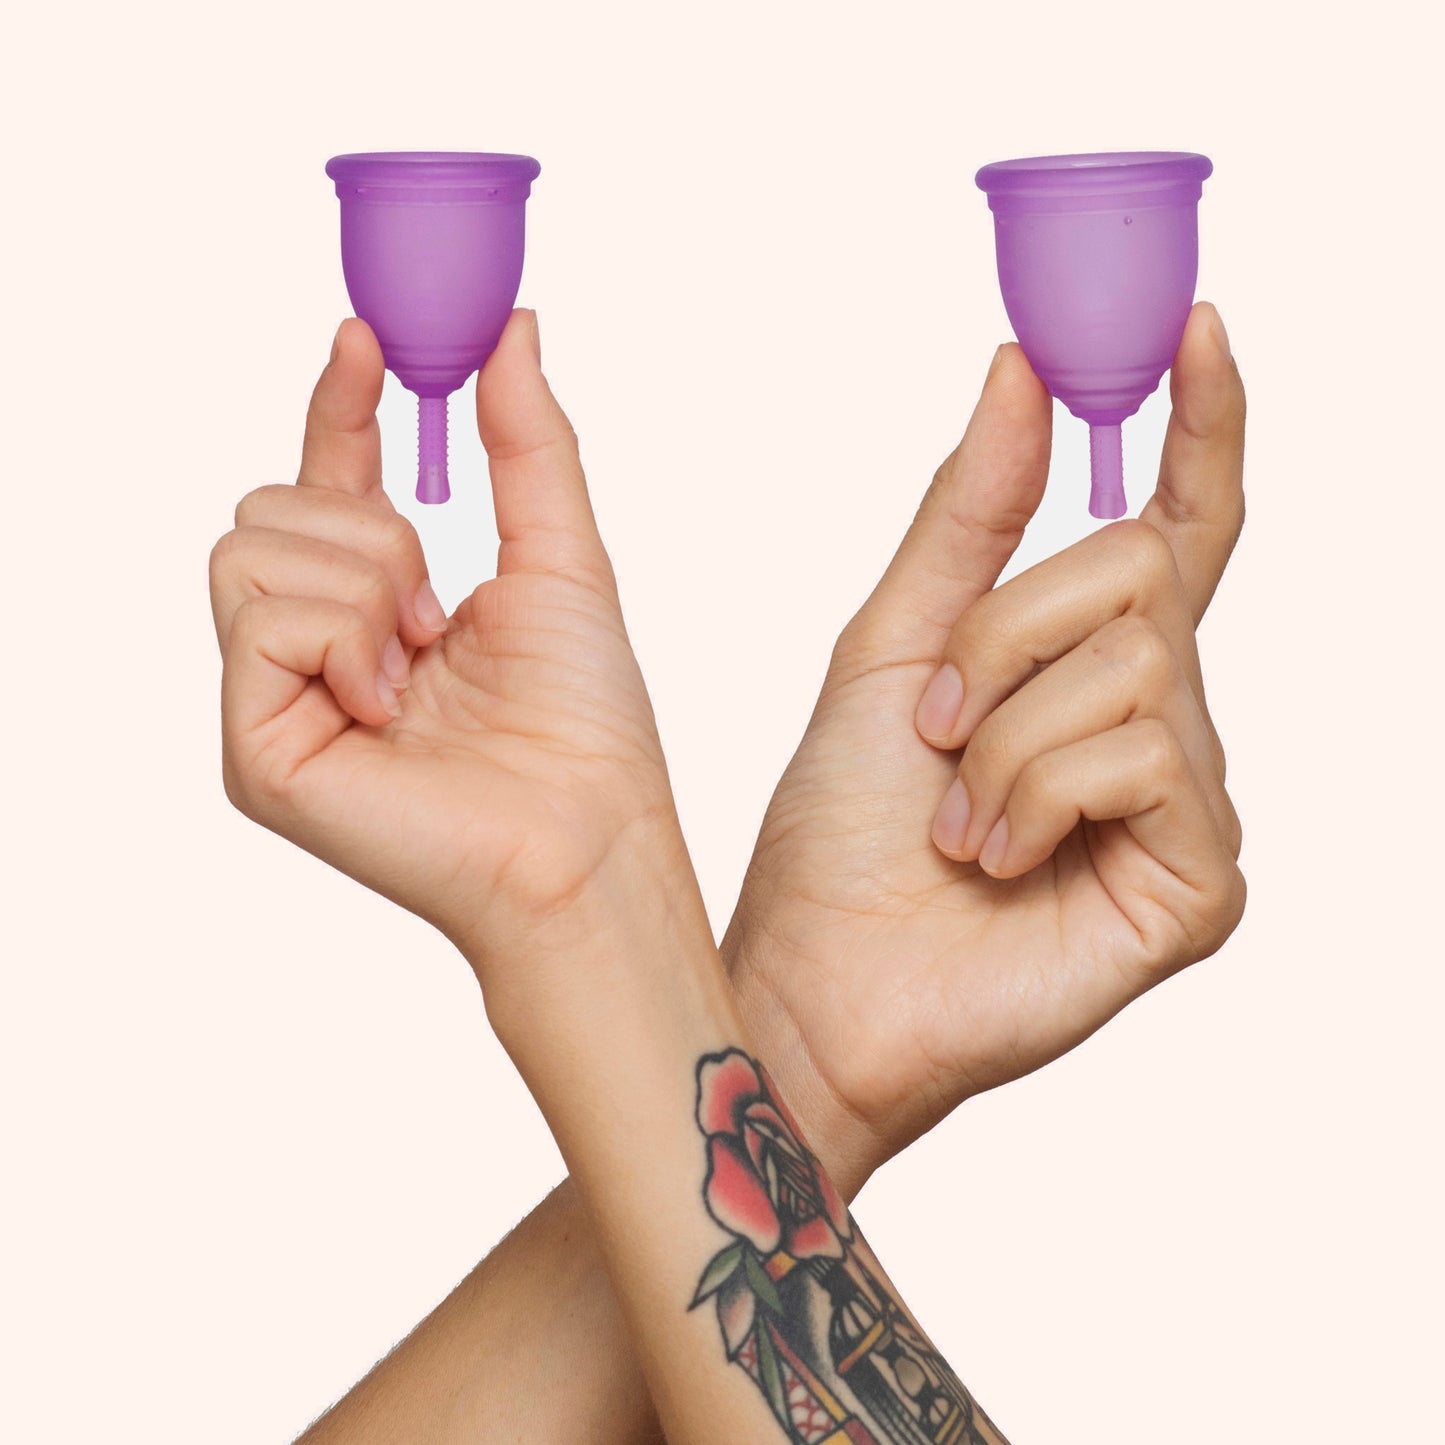 Donate Ruby Cup - Menstrual cup donation